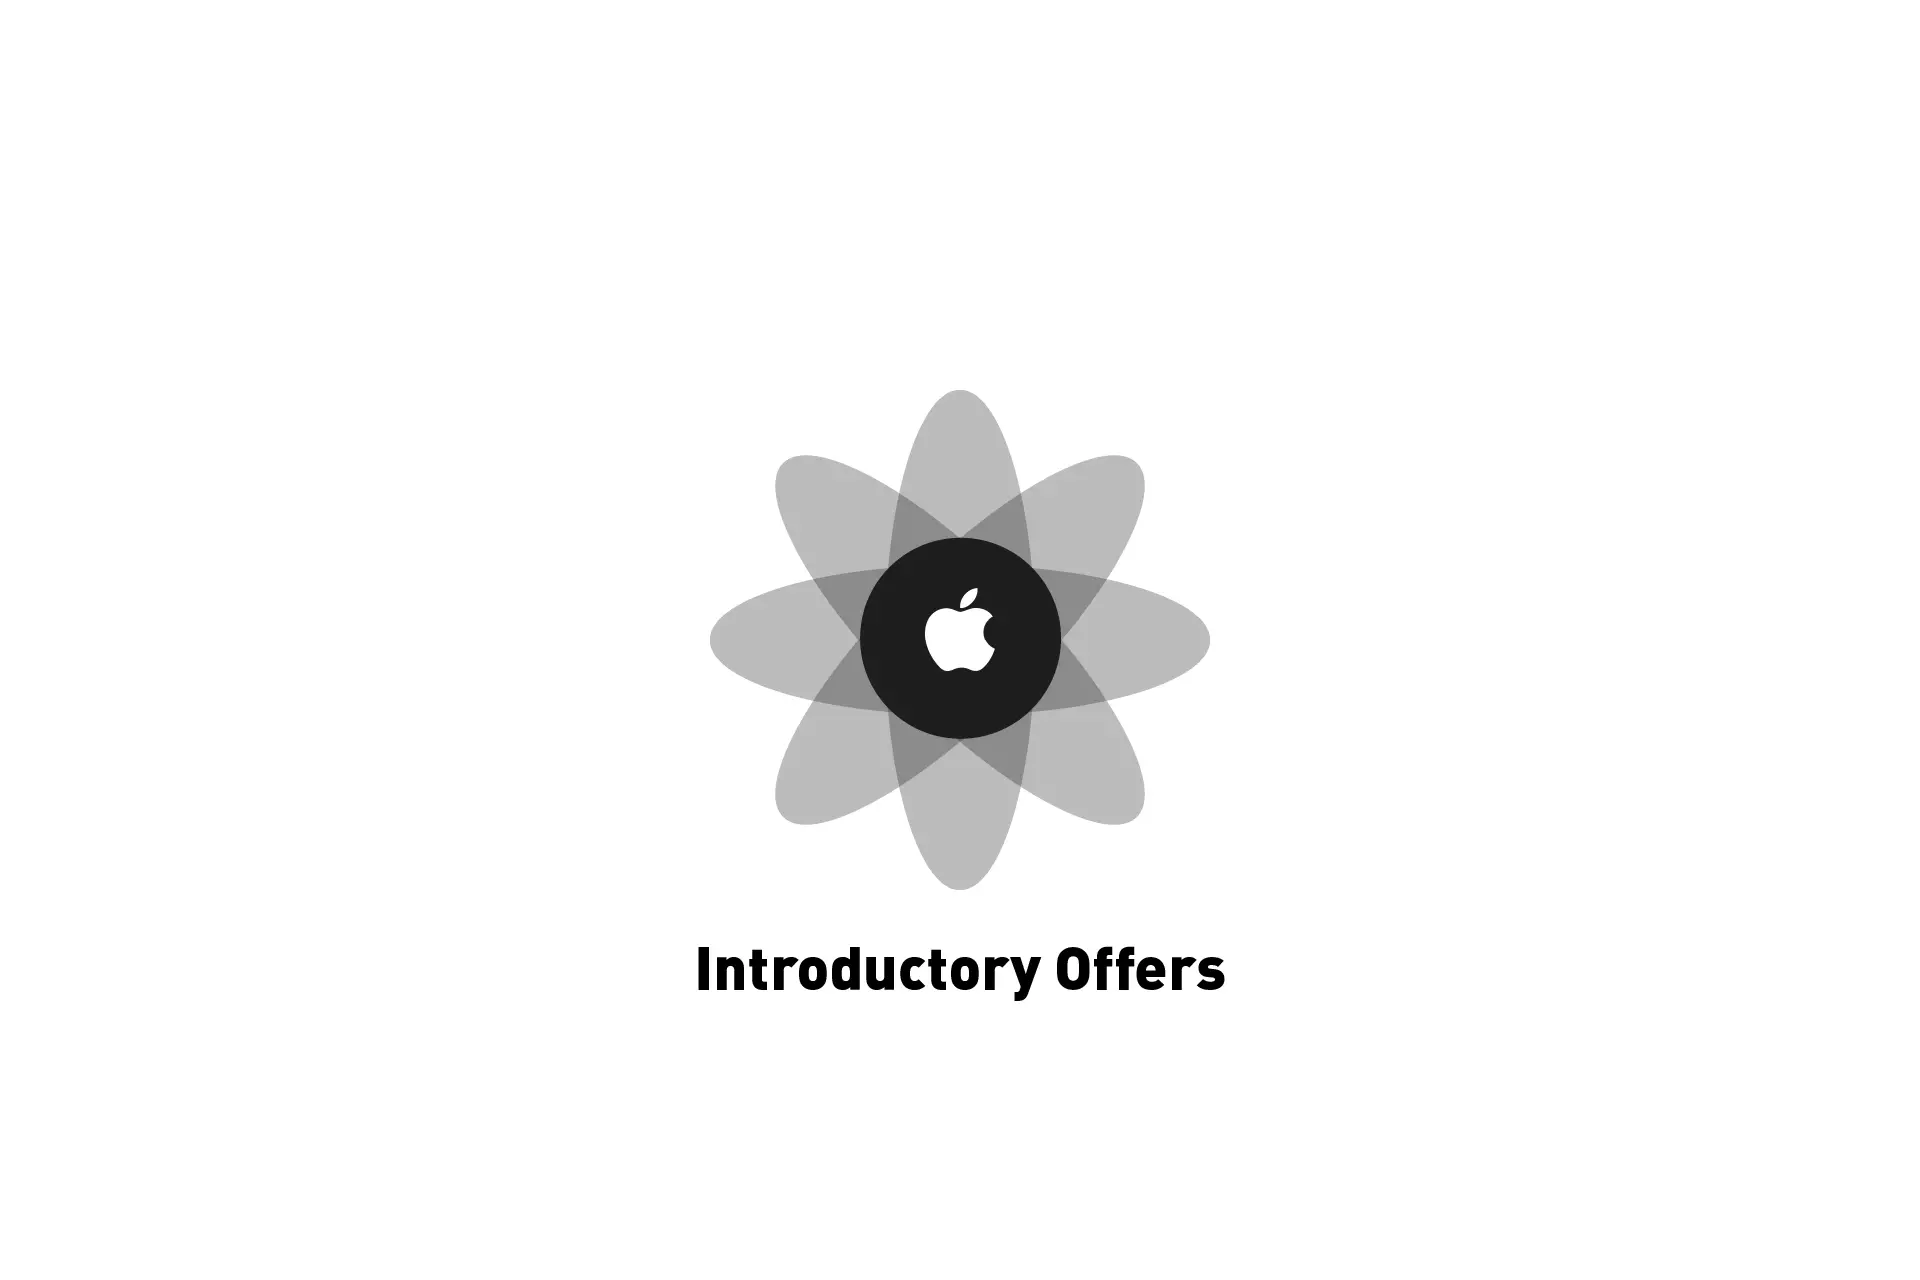 A flower that represents Apple with the text "Introductory Offers" beneath it.